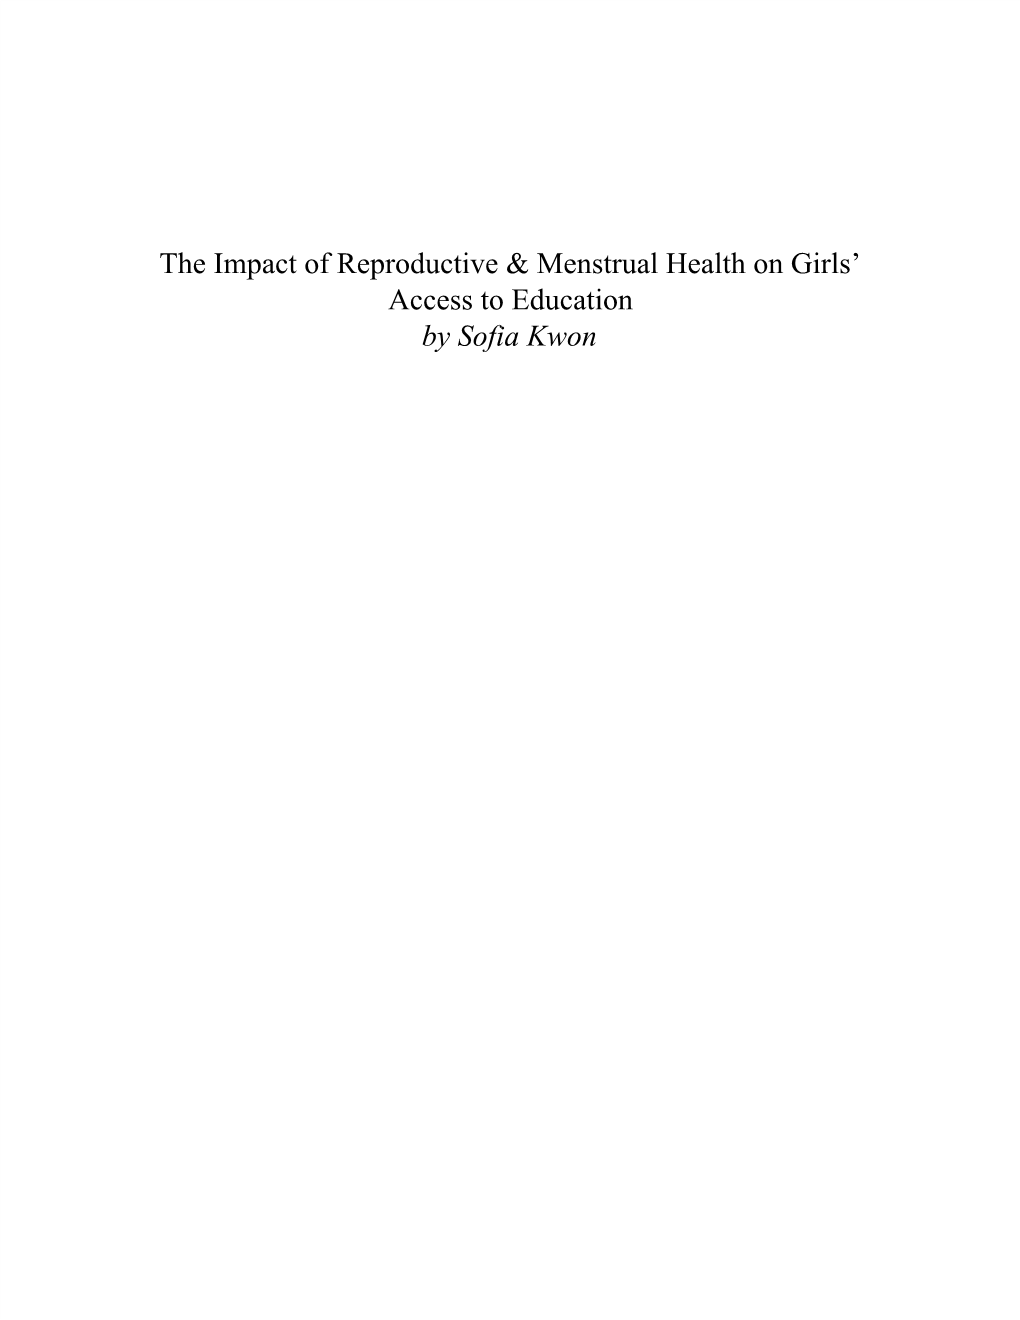 The Impact of Reproductive & Menstrual Health on Girls' Access To